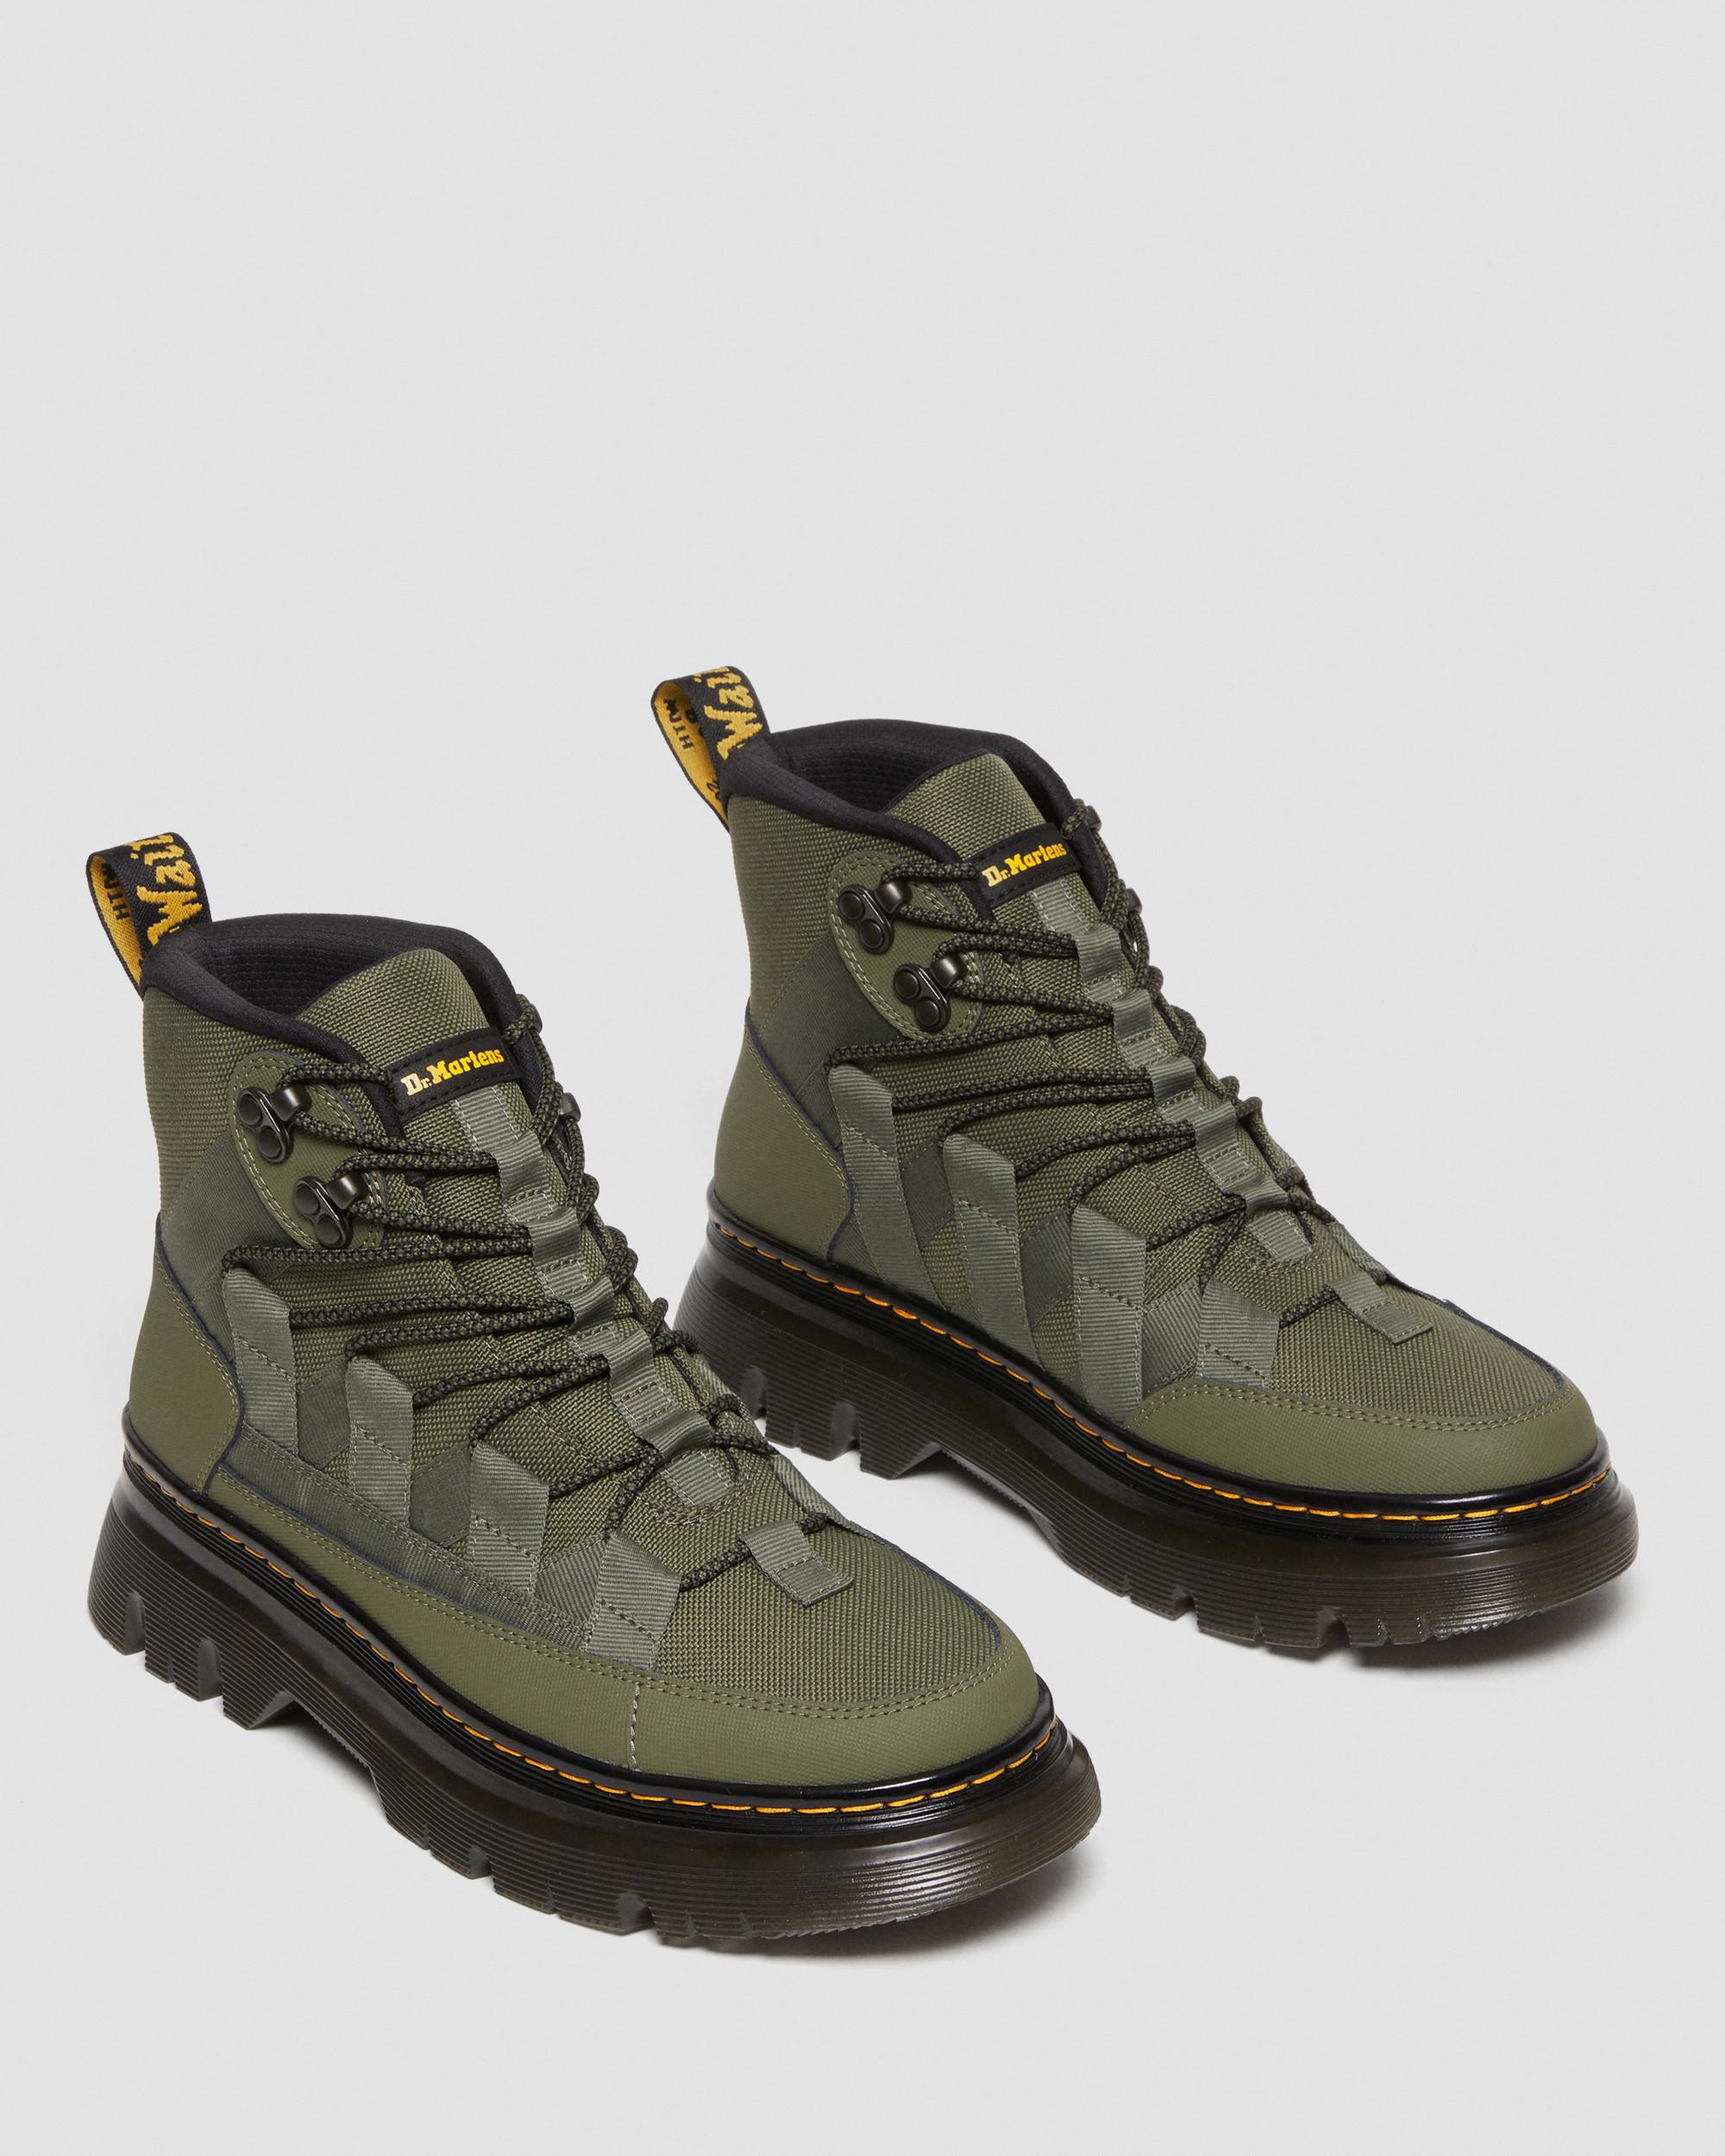 Boury Utility BootsBoury Extra Tough Leather Utility Boots Dr. Martens